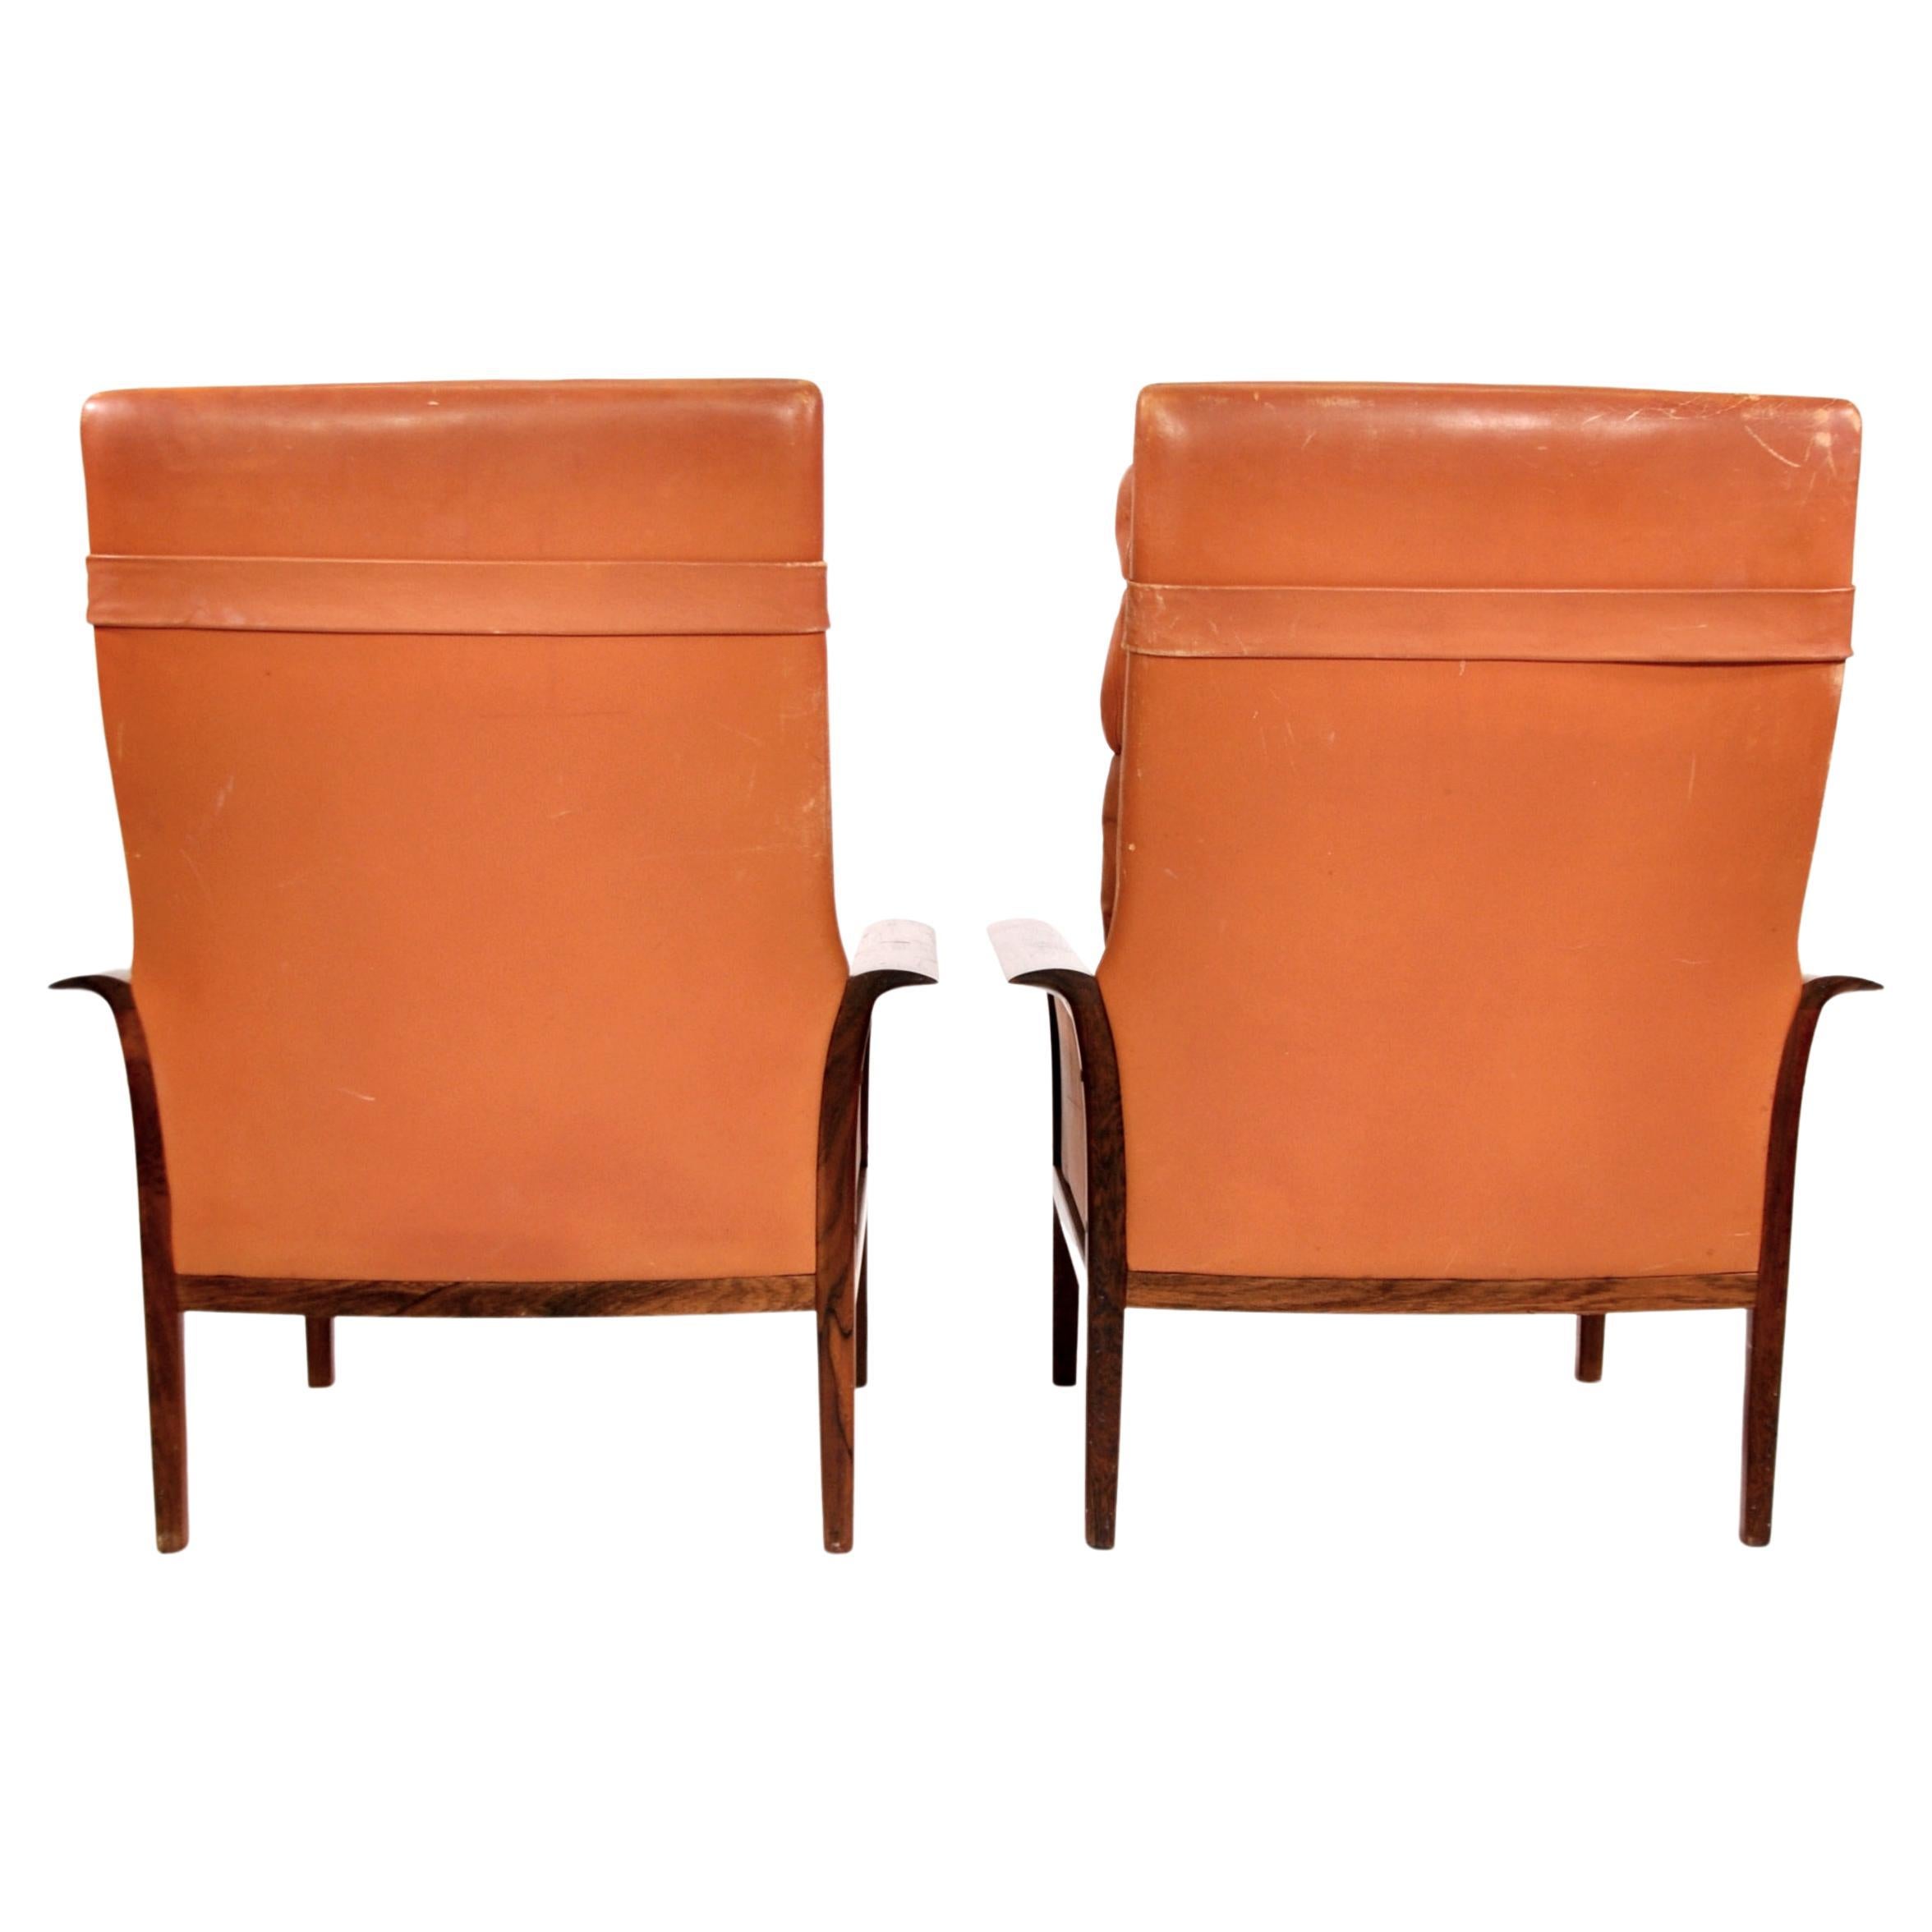 Rosewood Cognac Leather Chairs with Ottoman, by Fredrik Kayser for Vatne Mobler 3